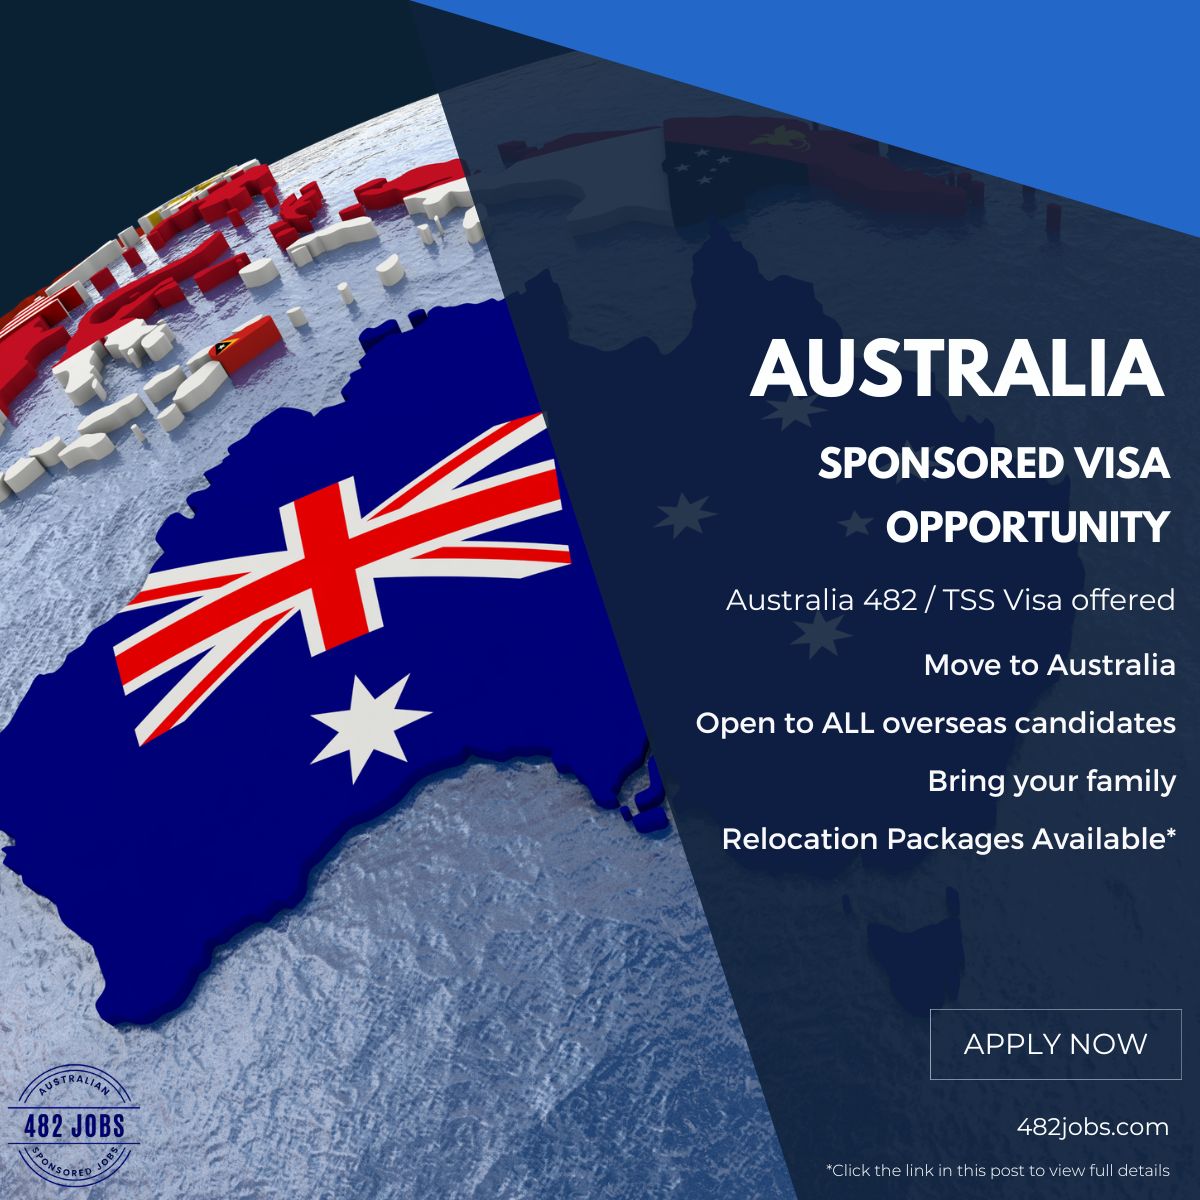 Chef Required for Busy Hotel - Australia Sponsorship available for the right candidate

#australiajobs #workinaustralia #workinbrisbane #workinsydney #australiavisa #jobinaustralia

482jobs.com/job/chef-requi…